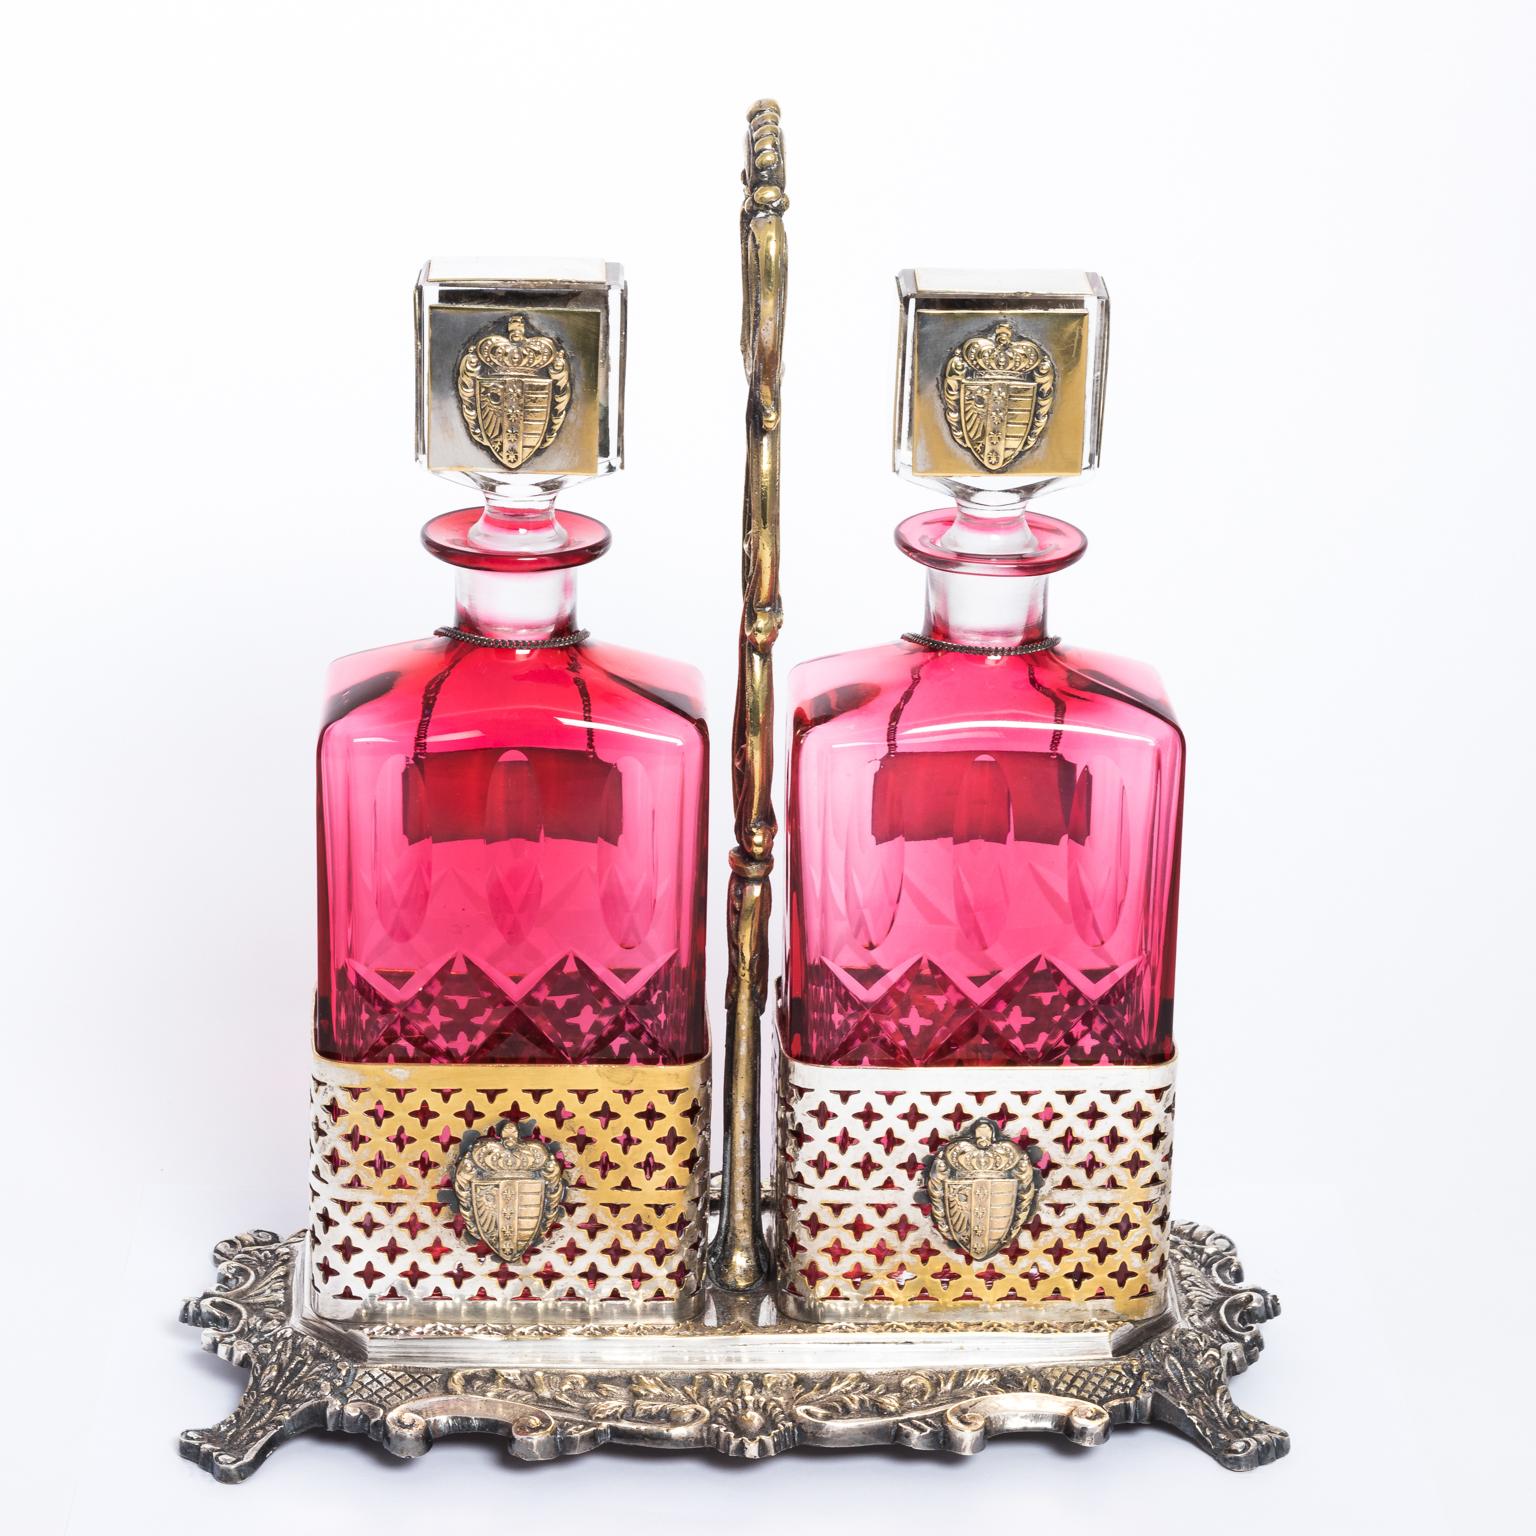 Cranberry/Cut Crystal Decanter Set English Ornate Plated Holder 10